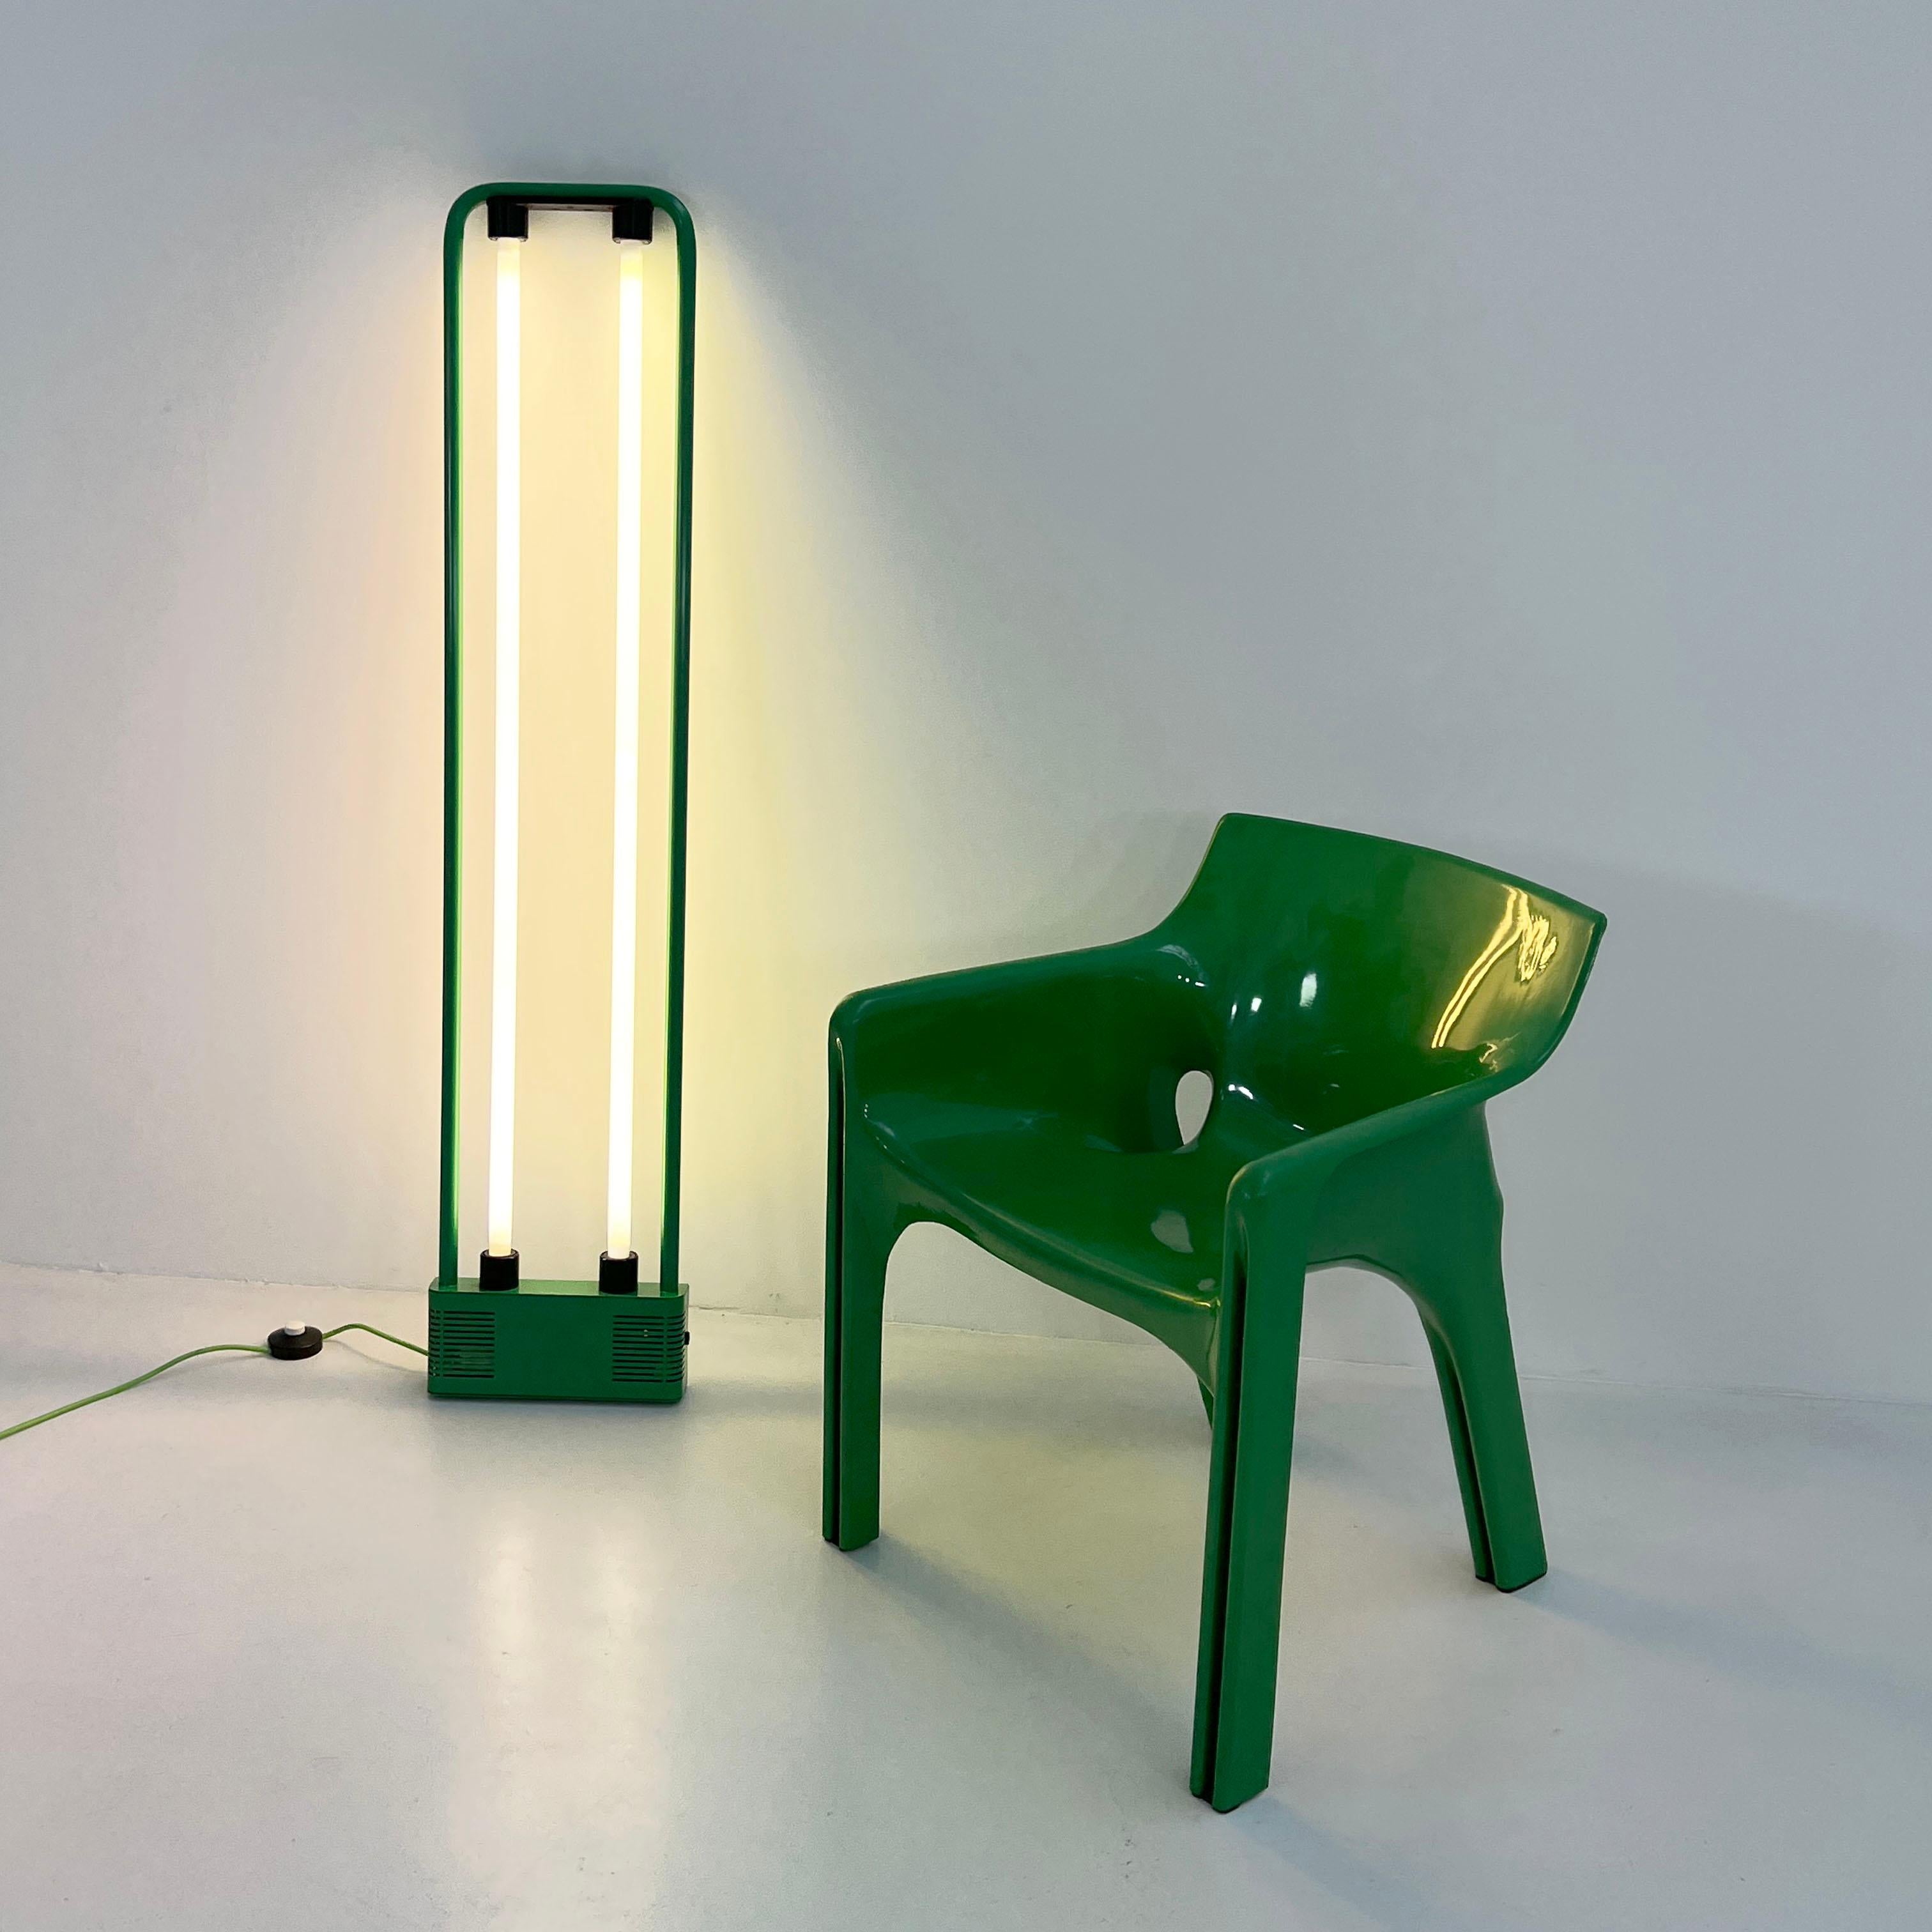 Late 20th Century Green Neon Lamp by Gian N. Gigante for Zerbetto, 1980s